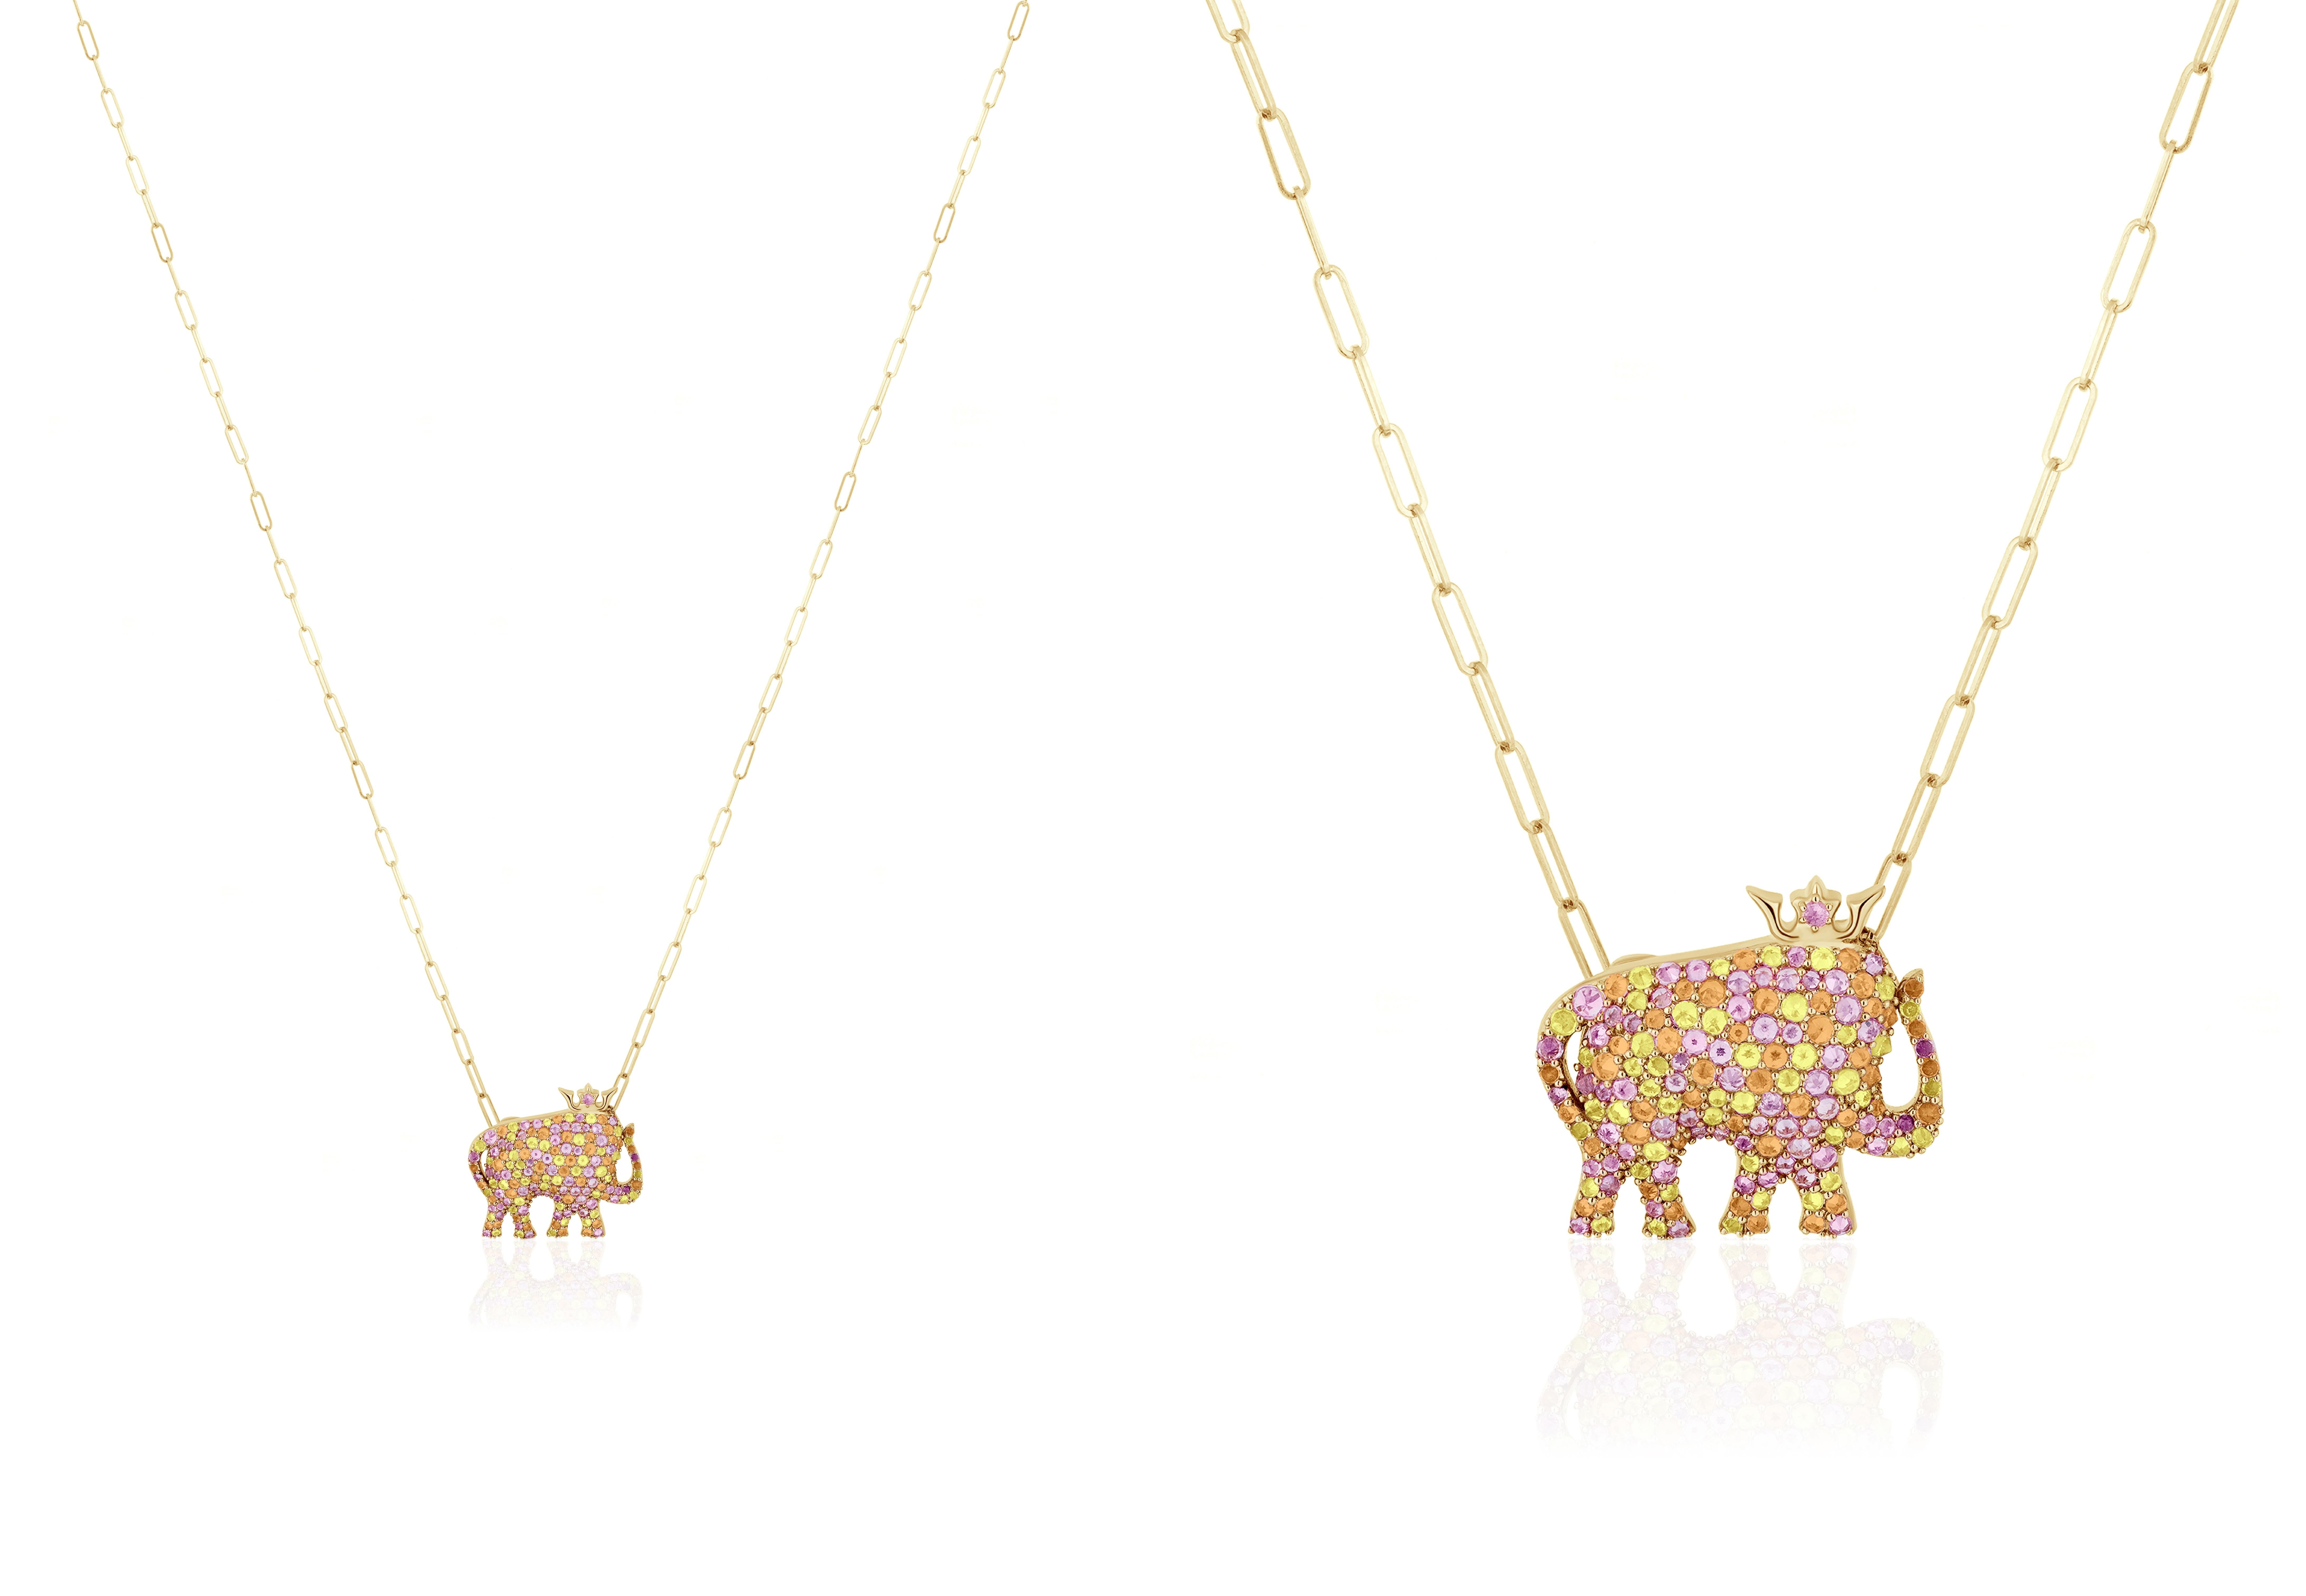 This Multi Sapphire Elephant Shape Pendant in 18K Yellow Gold is a stunning and unique piece from the 'Limited Edition' collection. Crafted in 18K yellow gold, this pendant features a charming elephant shape, adorned with an array of vibrant